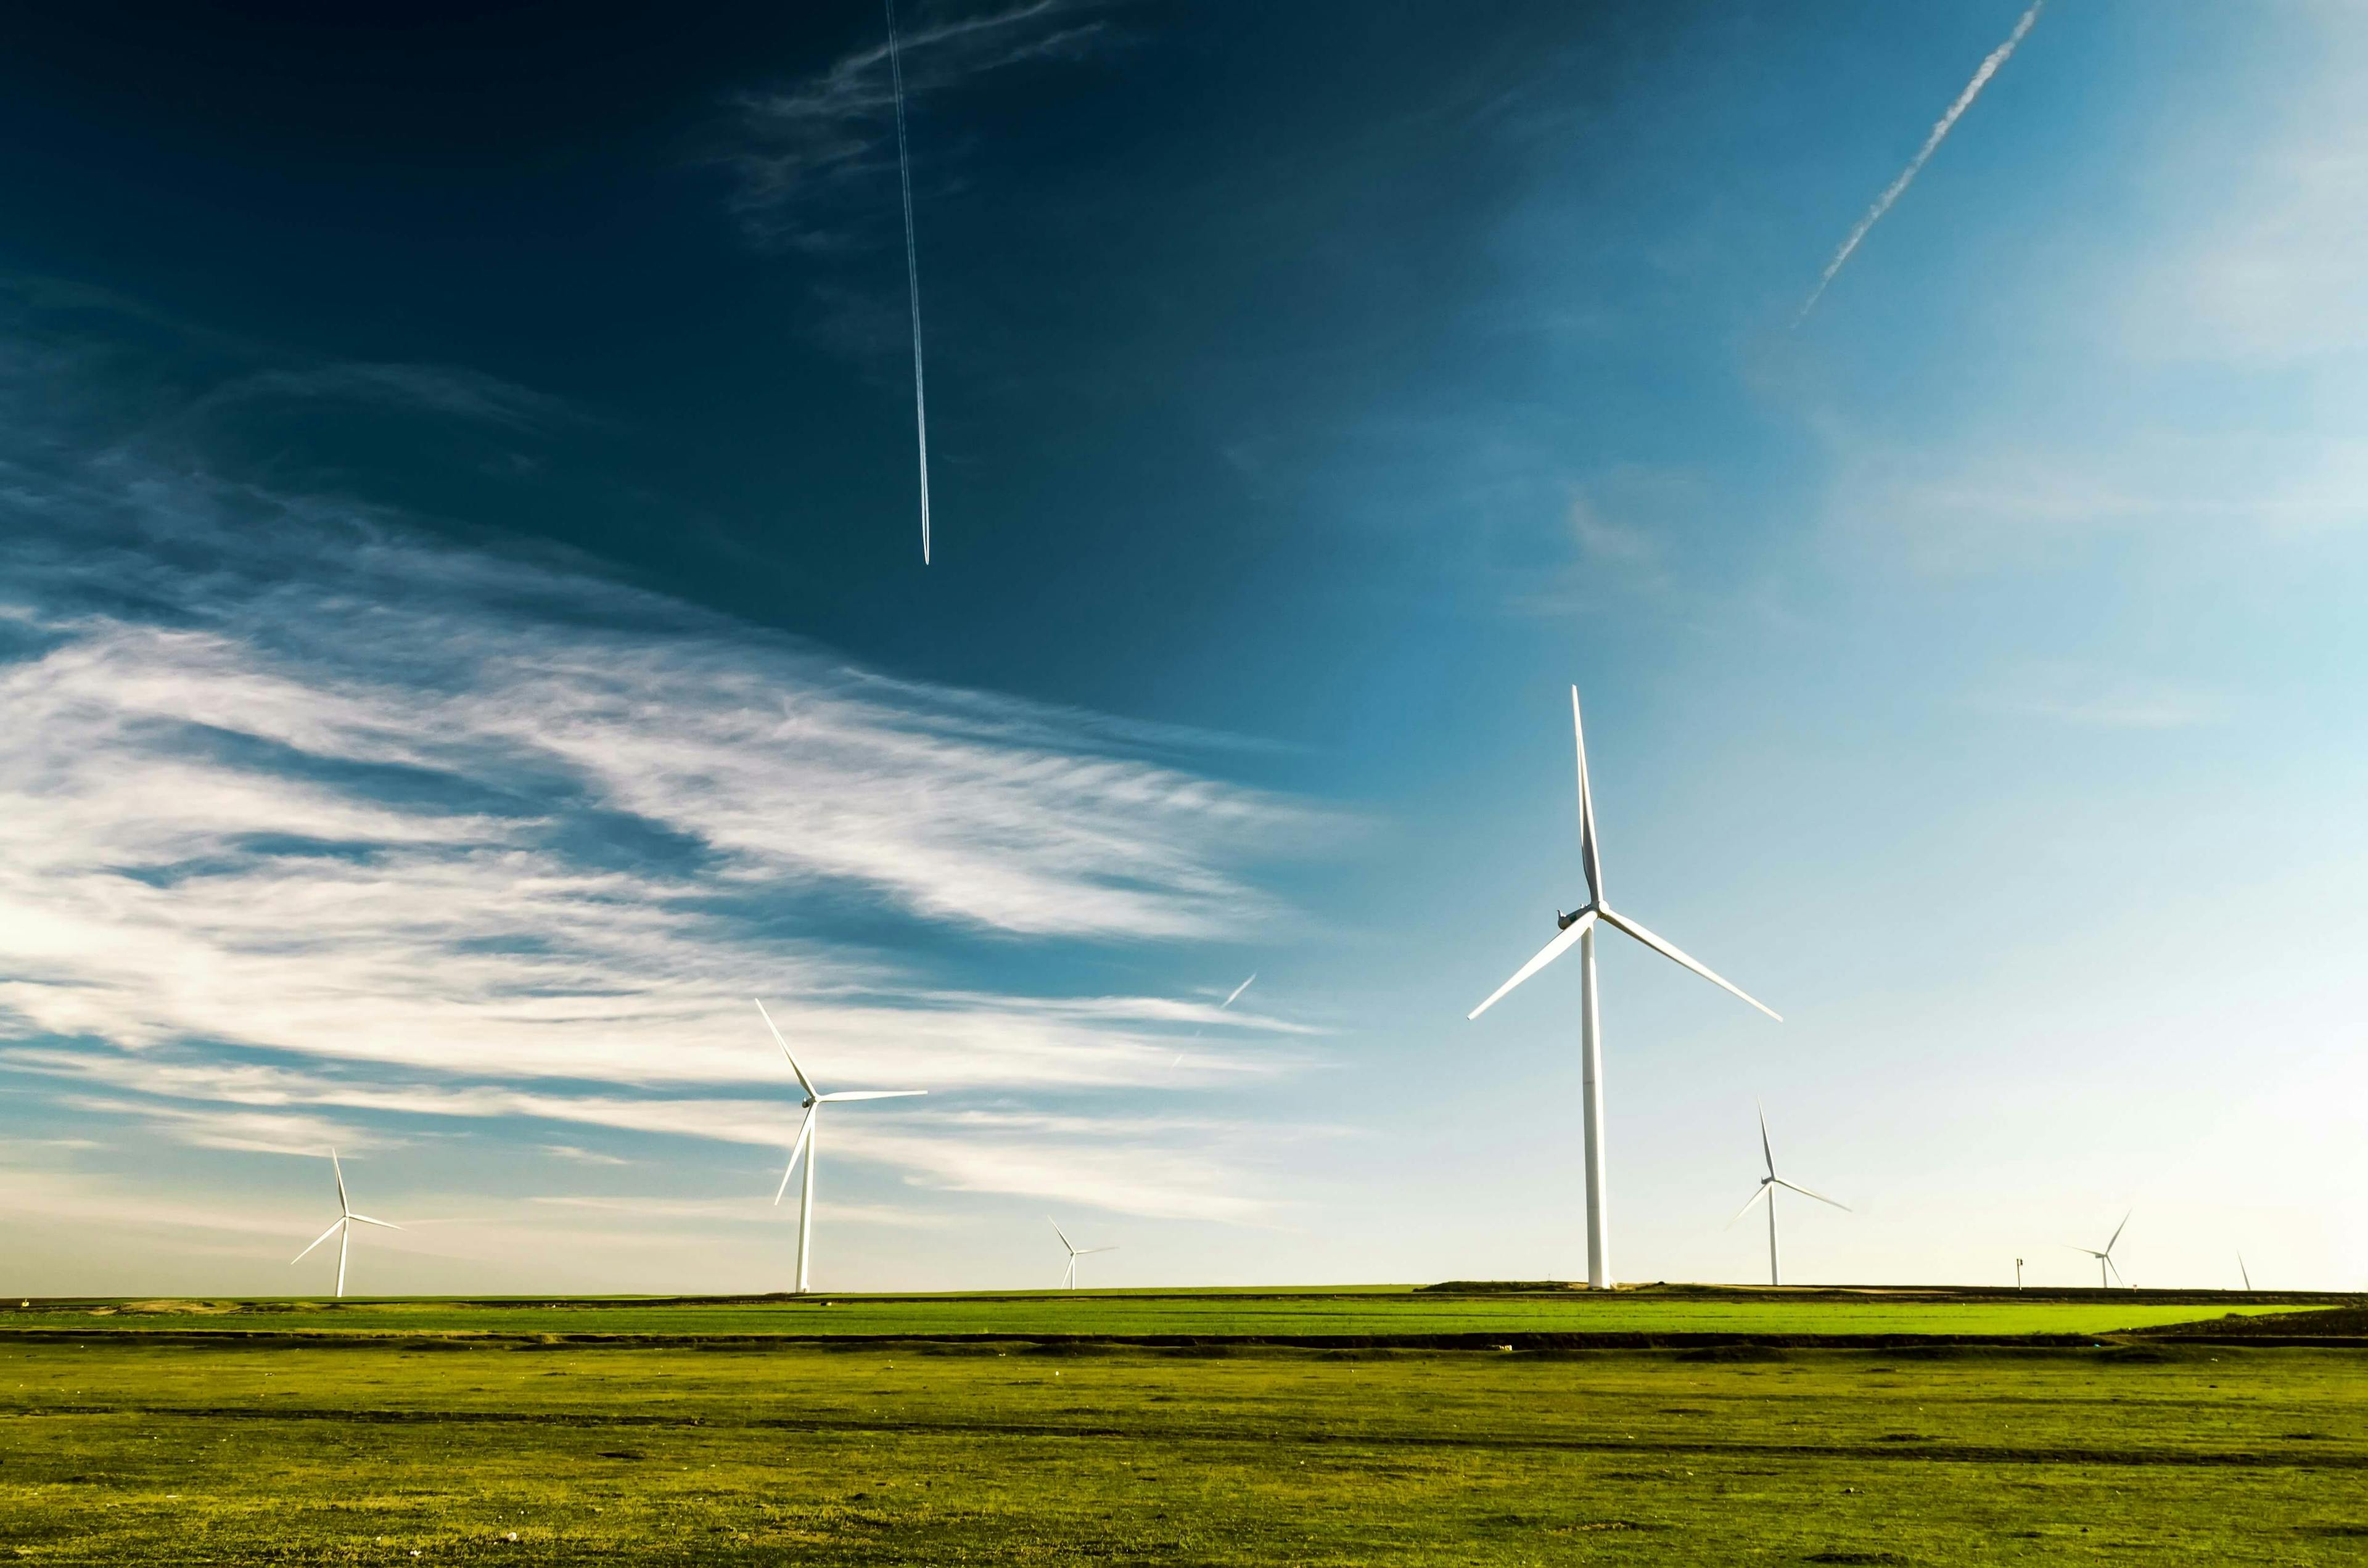 Wind turbines in a field. Vivid green grass with a blue sky backdrop